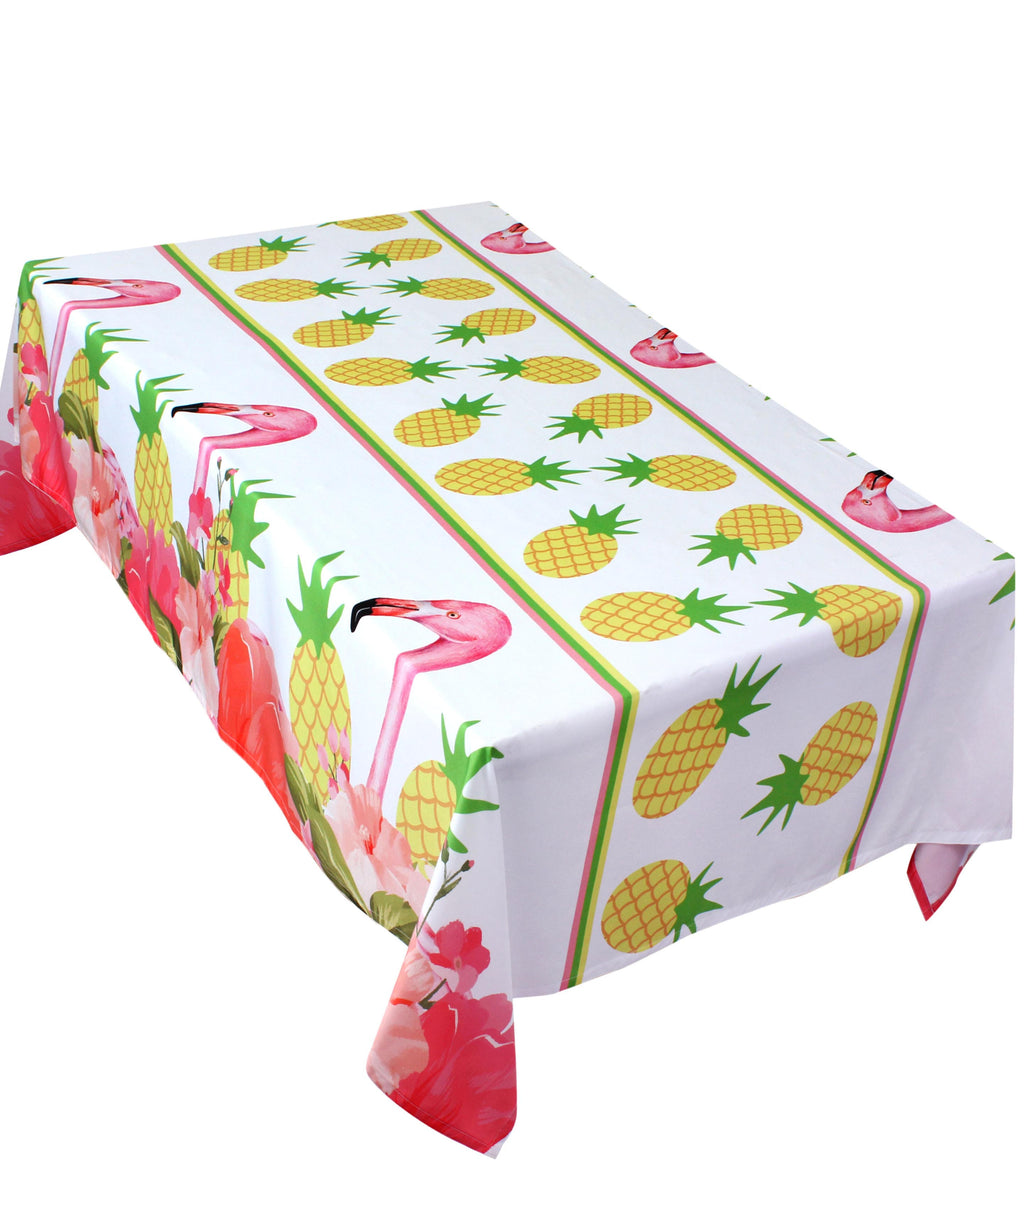 The Tropical Pine Table Cover